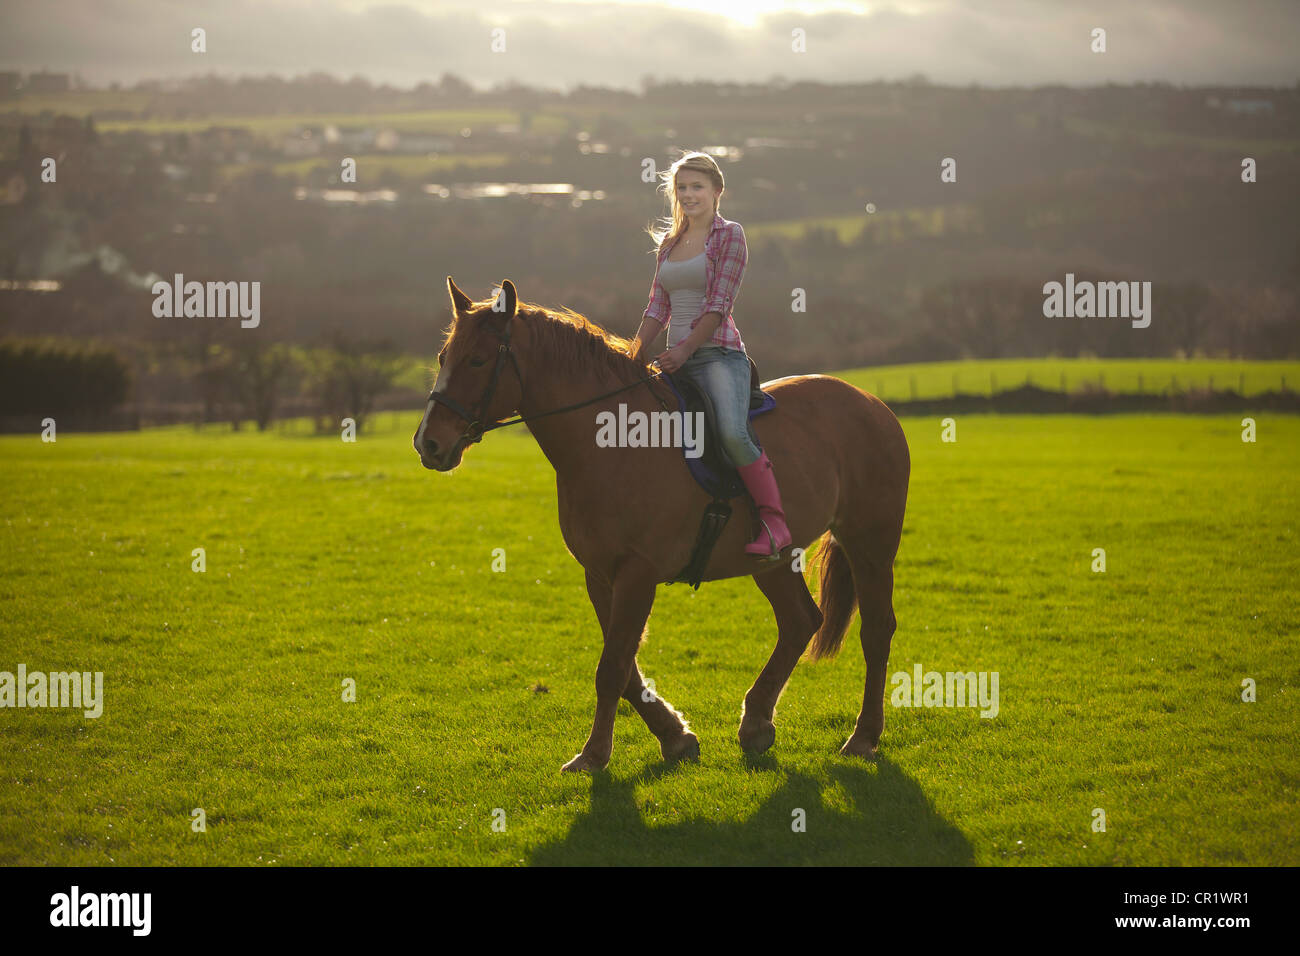 Teenage girl riding horse in field Banque D'Images